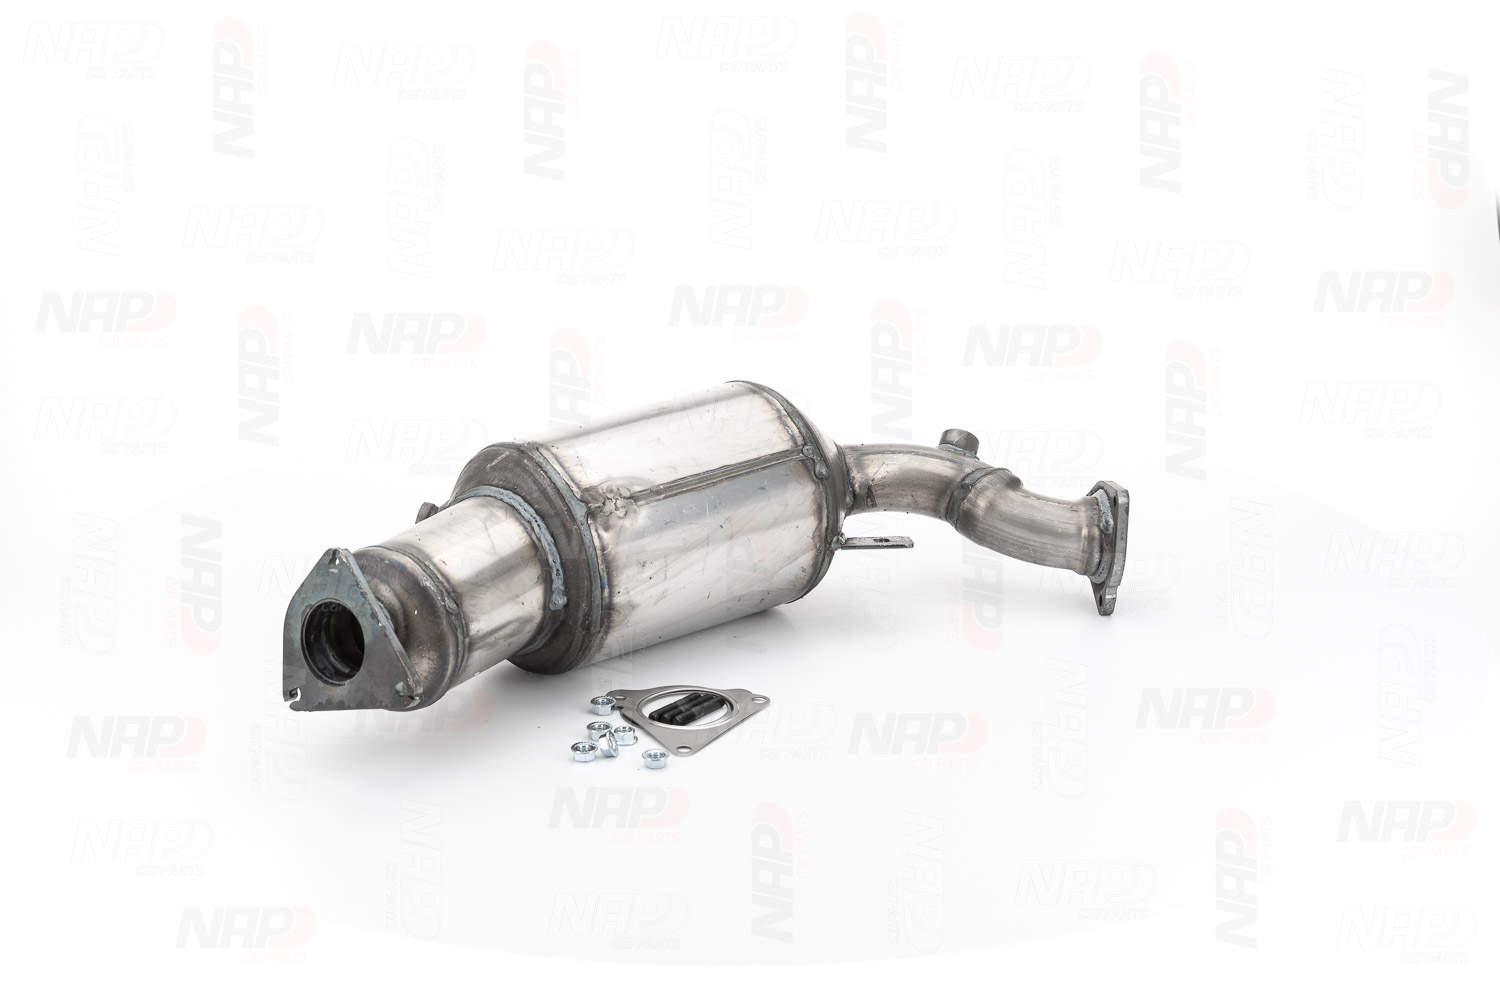 NAP carparts CAD10015 Diesel particulate filter Euro 4 (D4), Silicon carbide, with attachment material